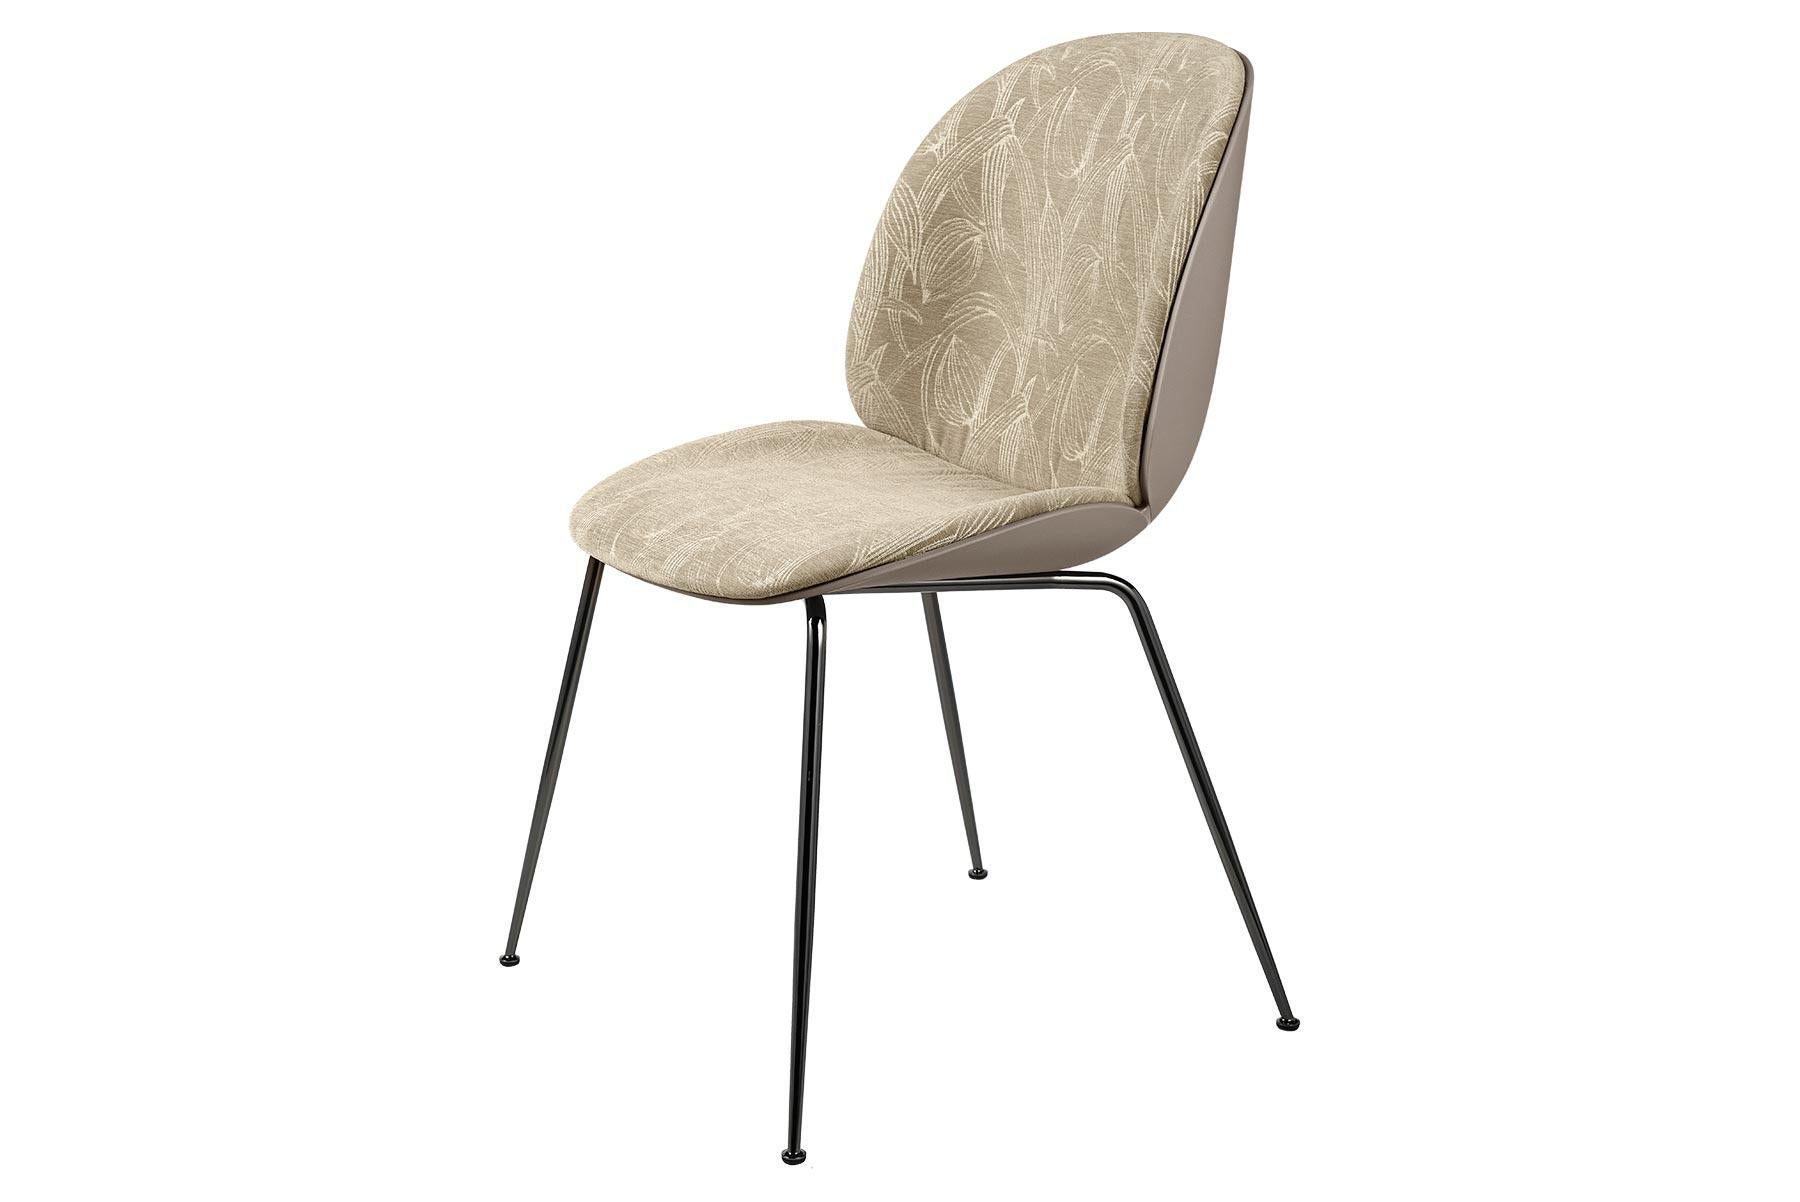 Looking closely at the anatomy of the beetle insect, characterized by its solid outside and soft inside, the front upholstered Beetle Chair possesses all attributes. The front upholstered Beetle Chair holds the same soft core as the fully